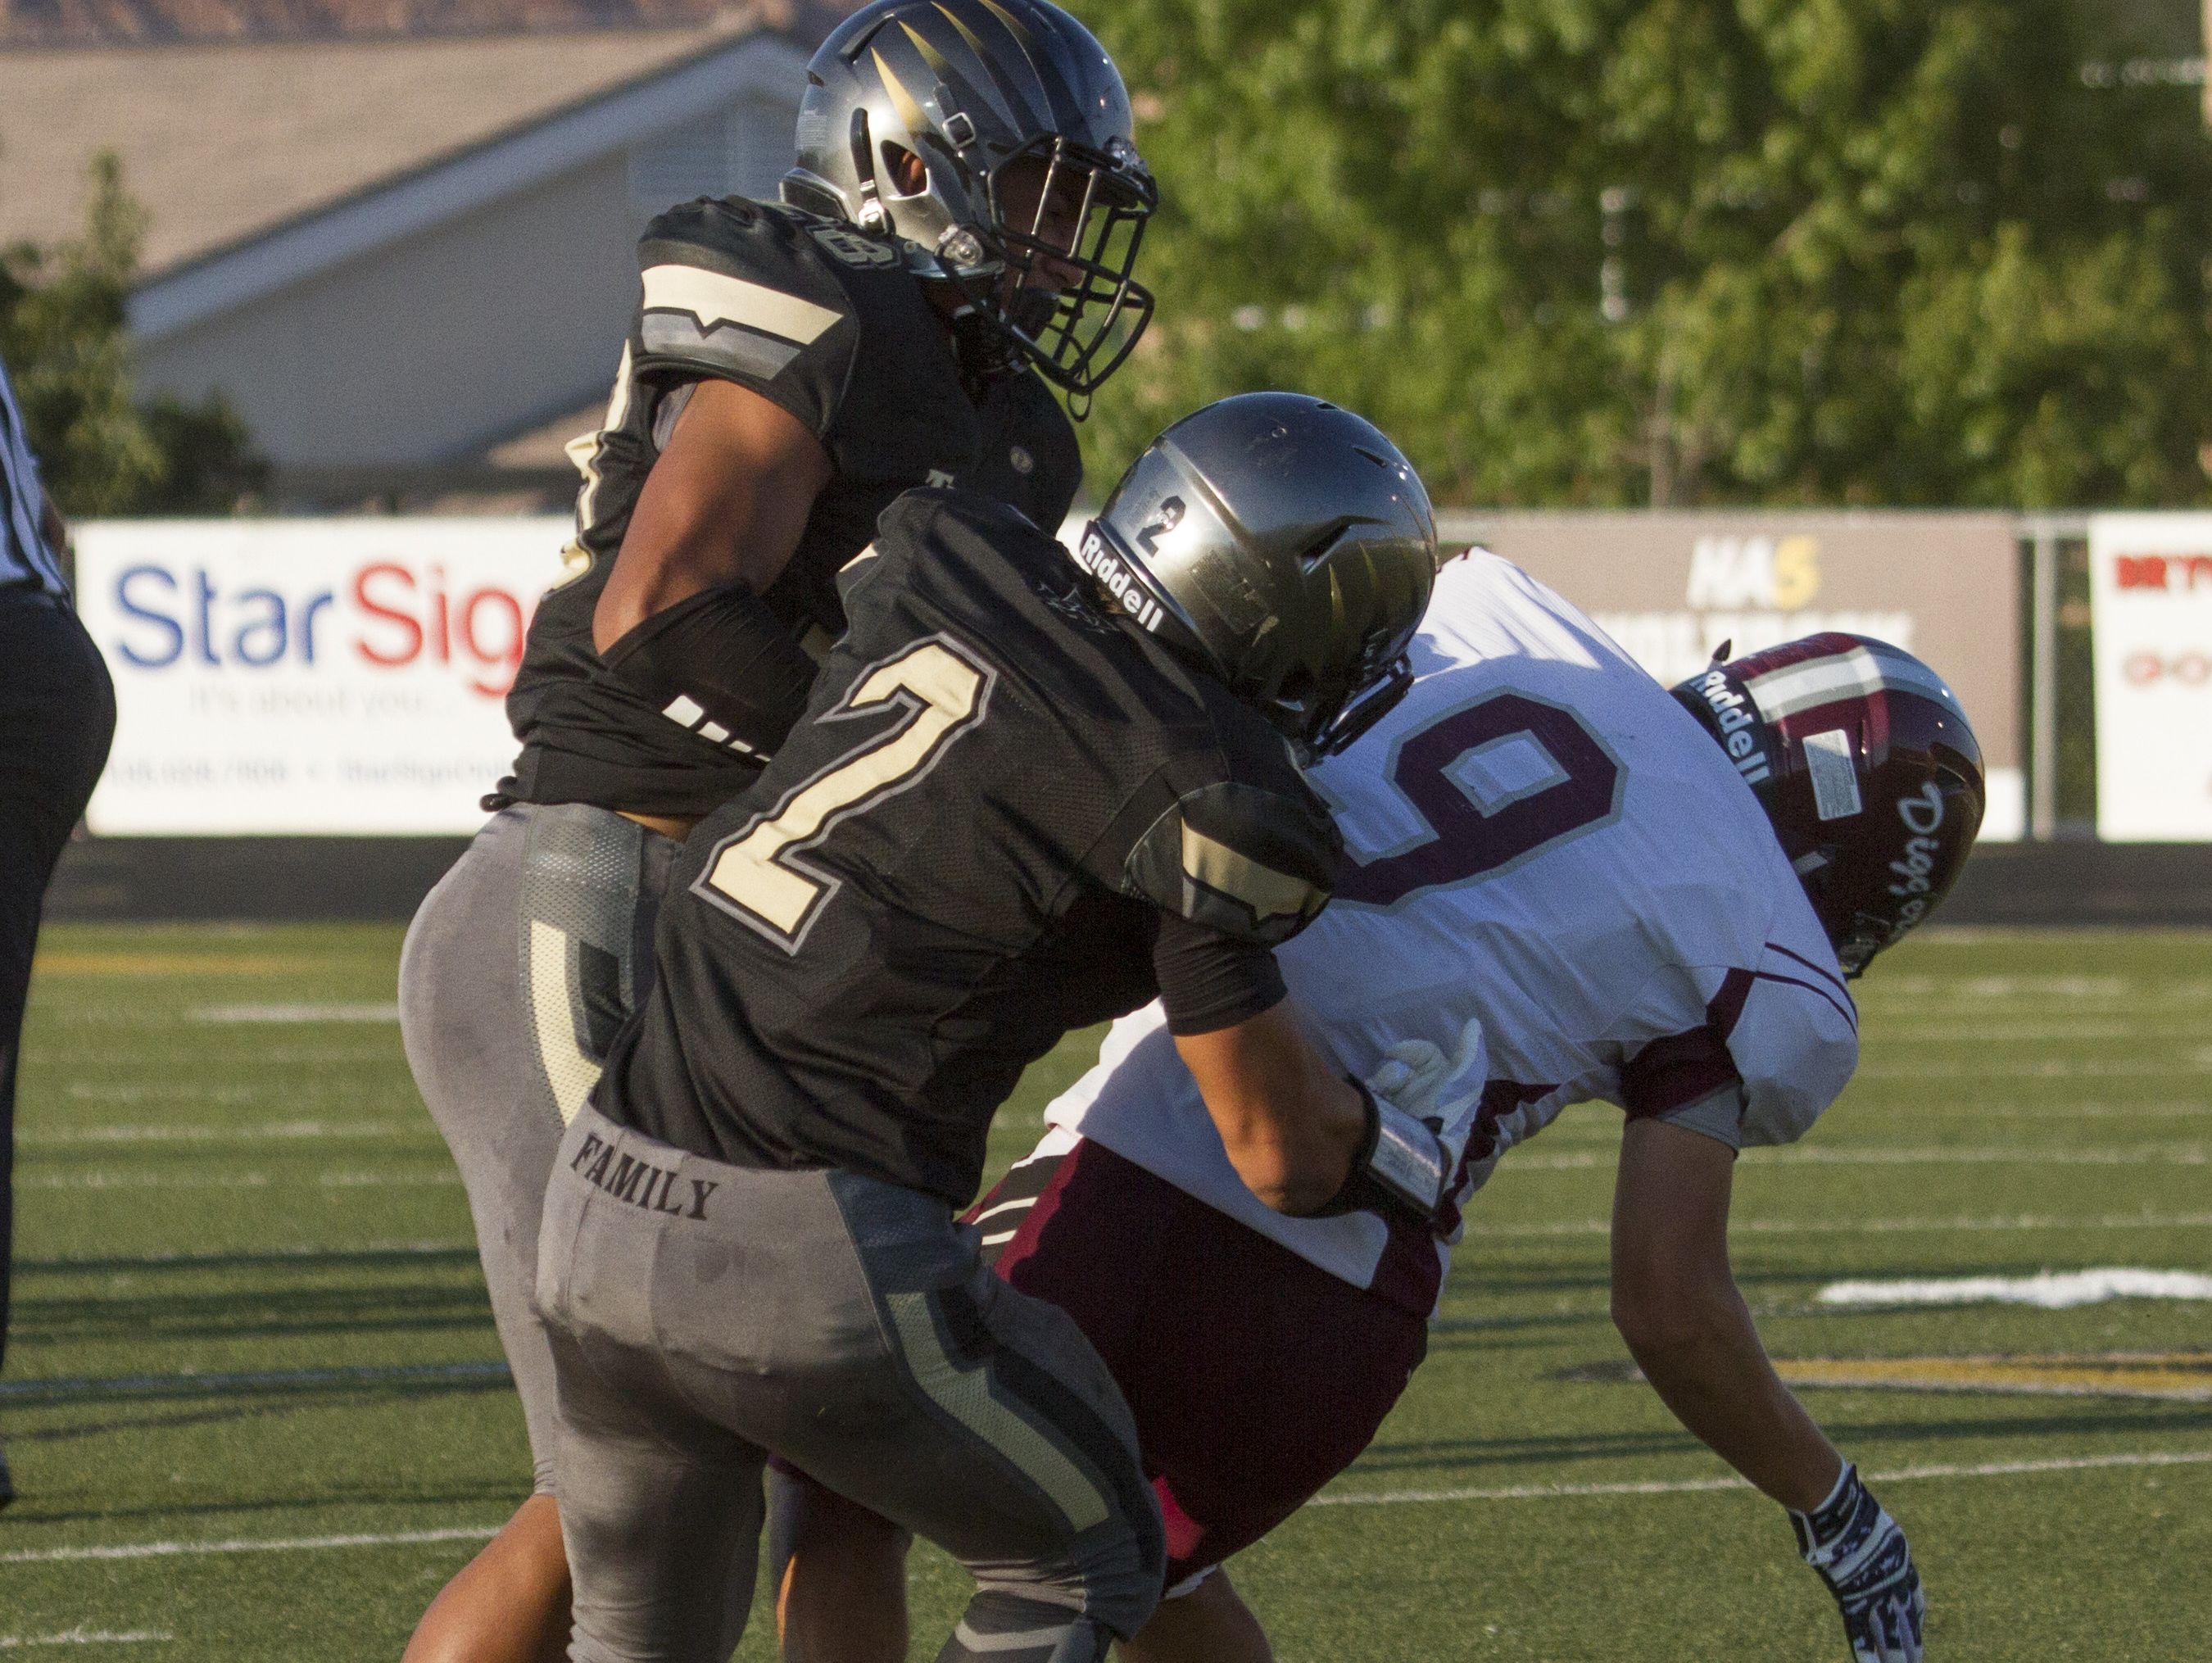 Desert Hills' Nephi Sewell hits a Jordan receiver during the first series of the game Friday, Aug. 21, 2015. The hit would be the season ending play for Sewell after damaging his vertebrae and needing emergency surgery.